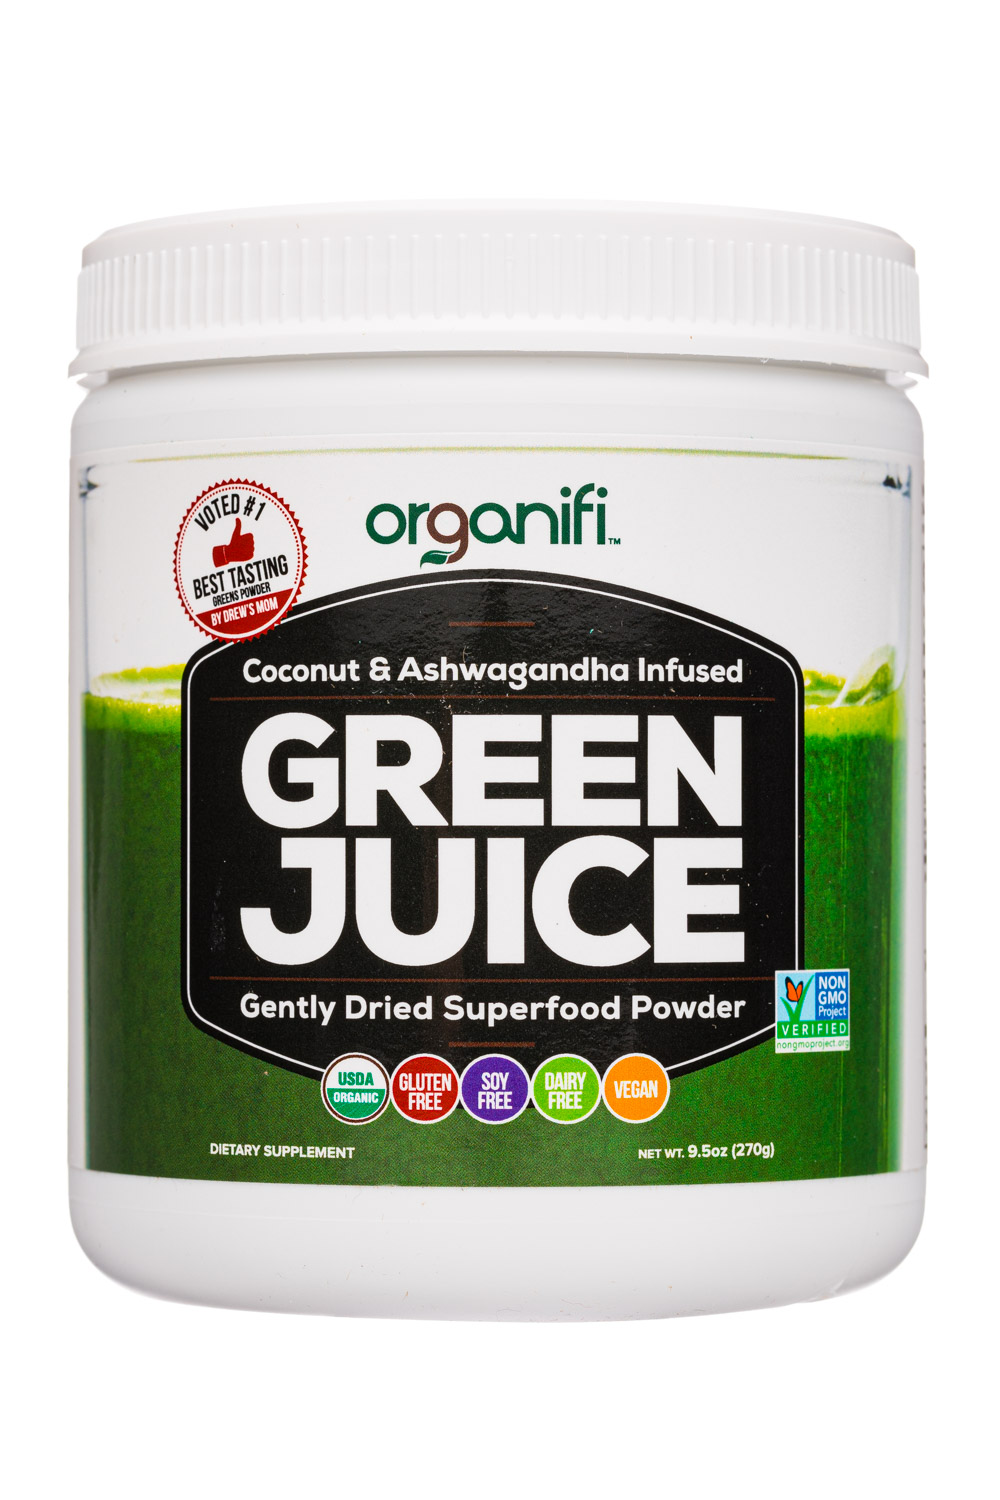 The Definitive Guide for Alert - Organifi Green Juice Review - Youtube